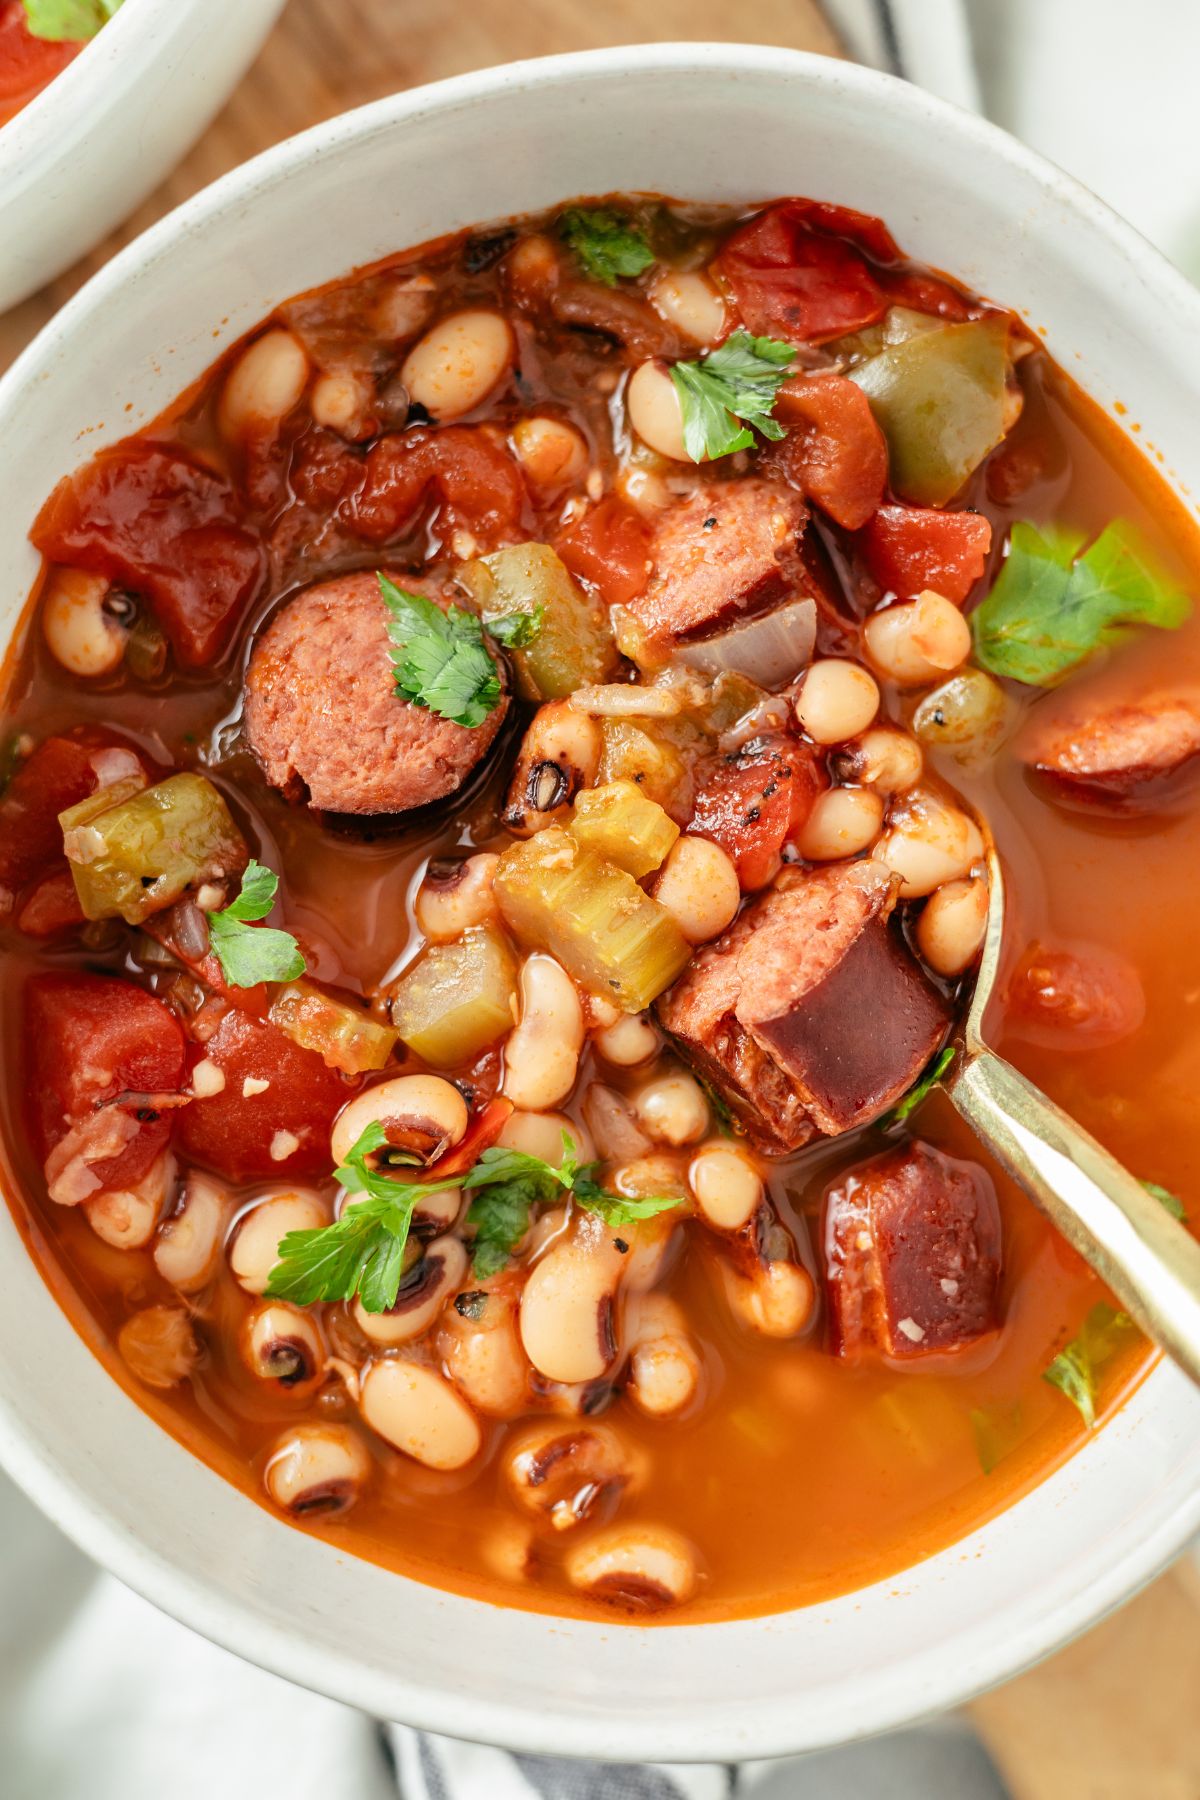 Bowl of hearty Black Eyed Pea Soup, showcasing a rich blend of beans, vegetables, and savory broth.